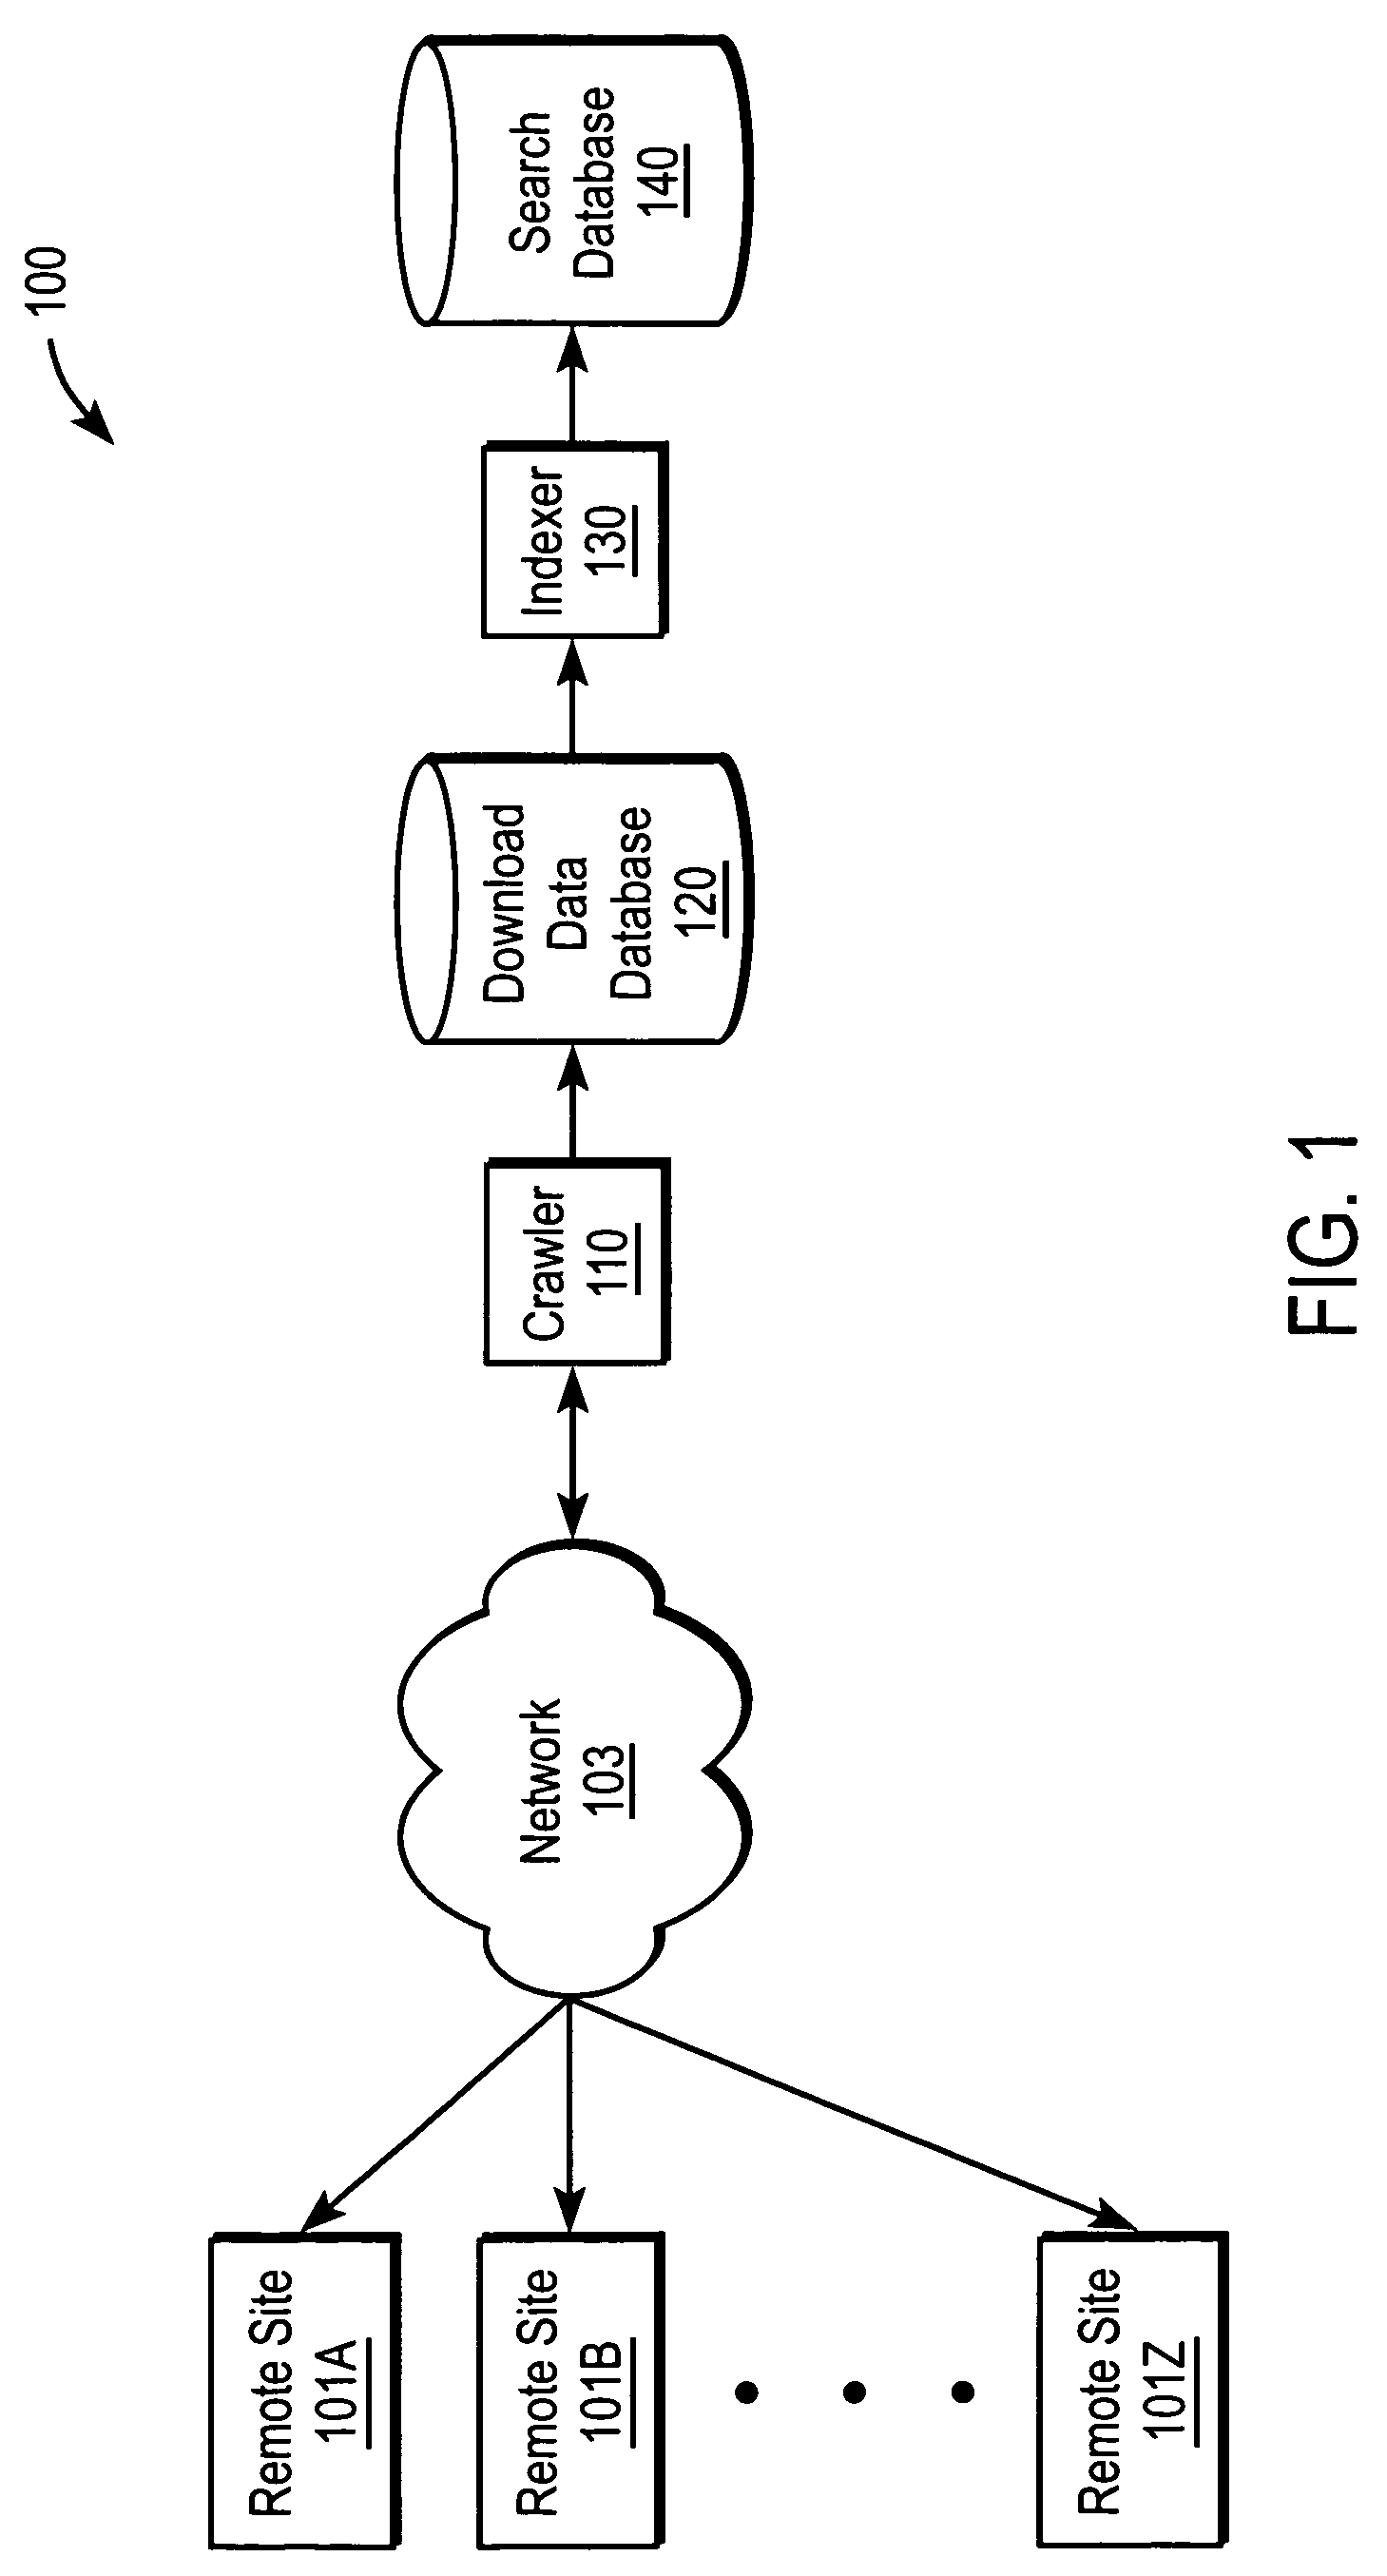 Methods and systems for generating query and result-based relevance indexes